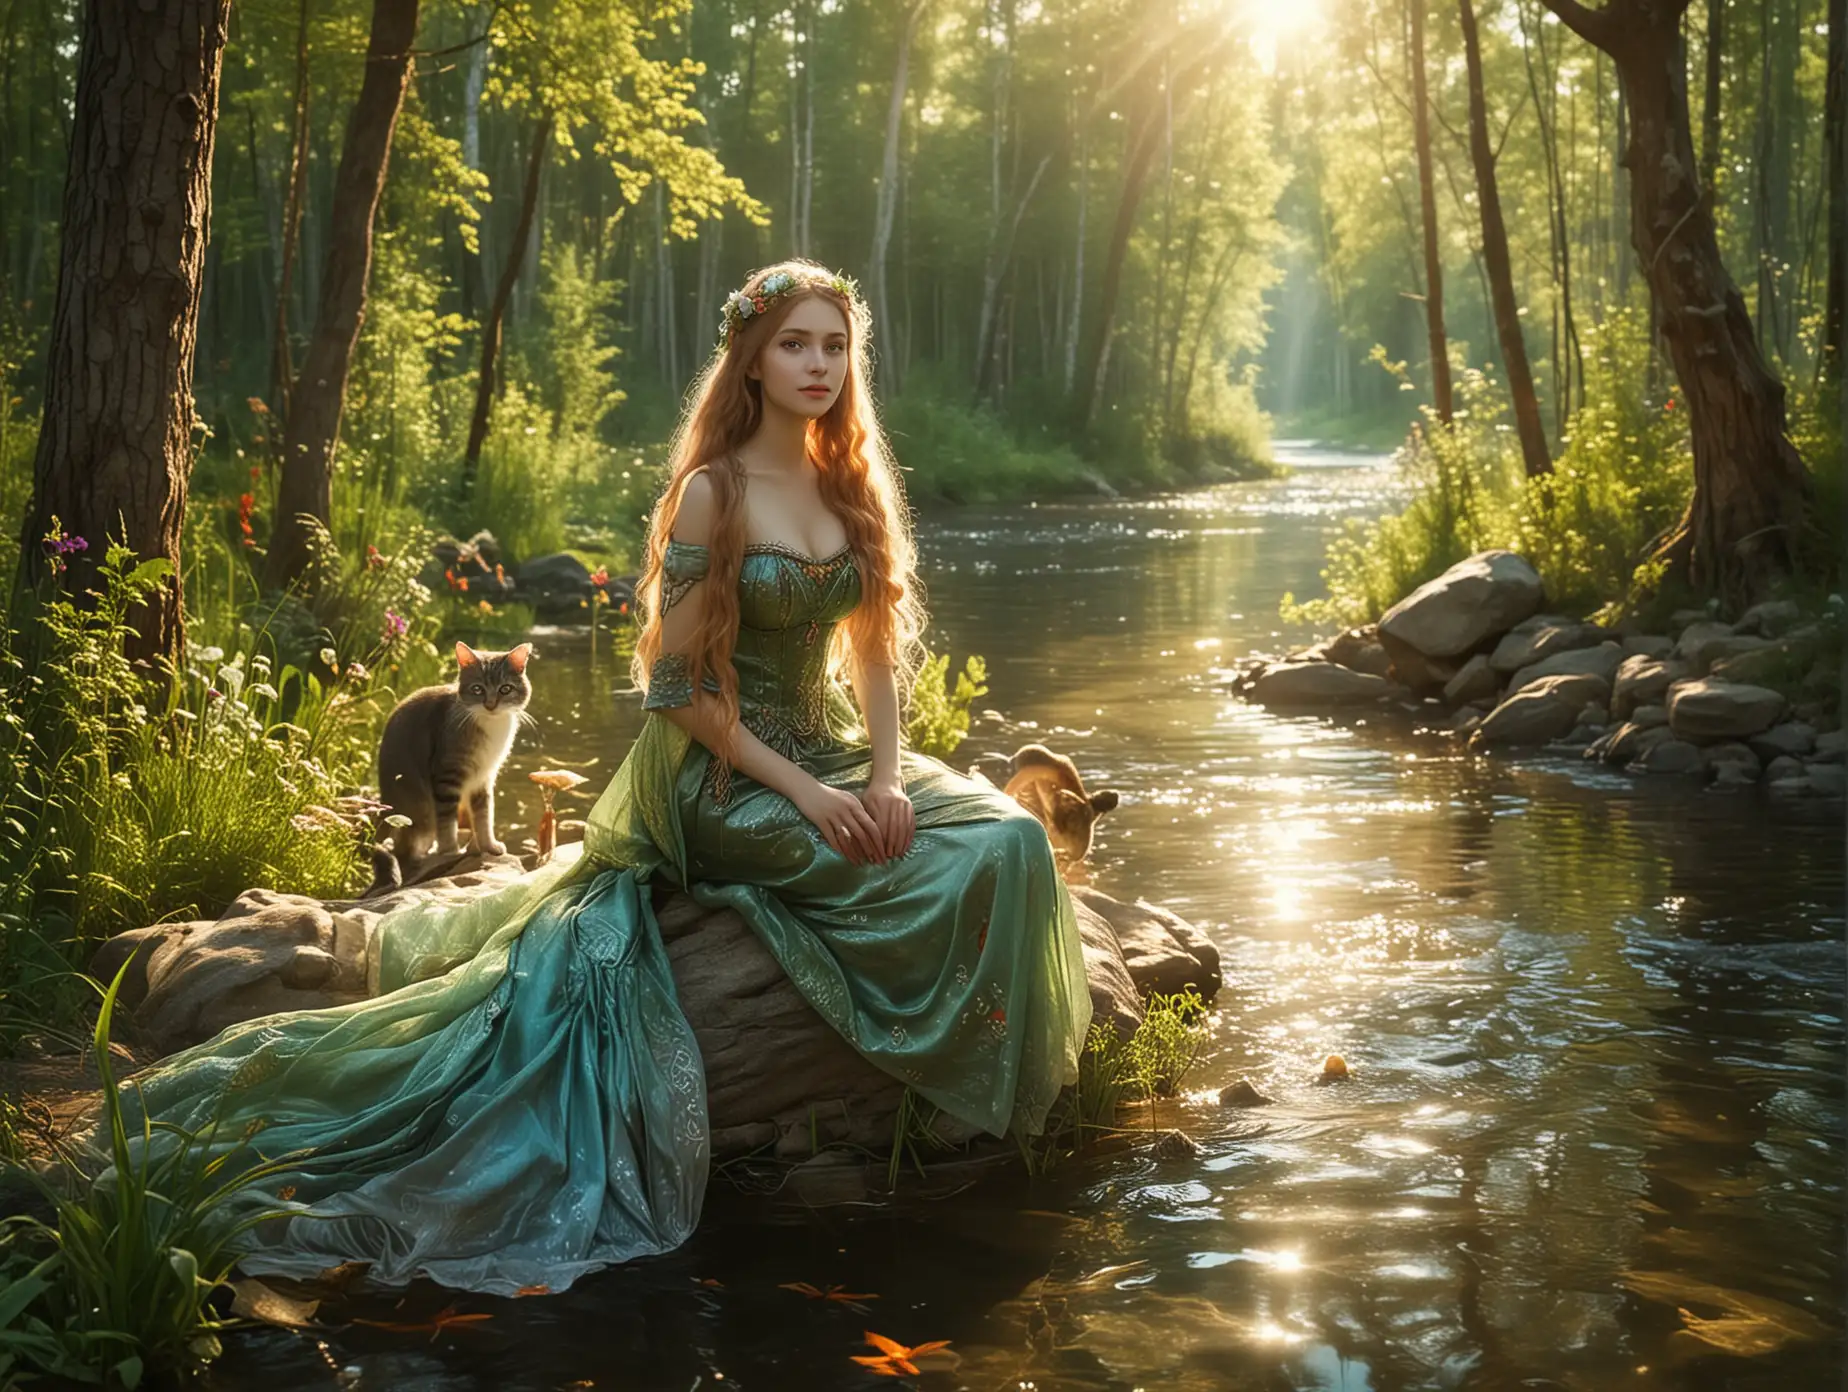 Russian-Fairy-Tale-Scene-with-Slavs-Cat-Mermaid-Forest-and-River